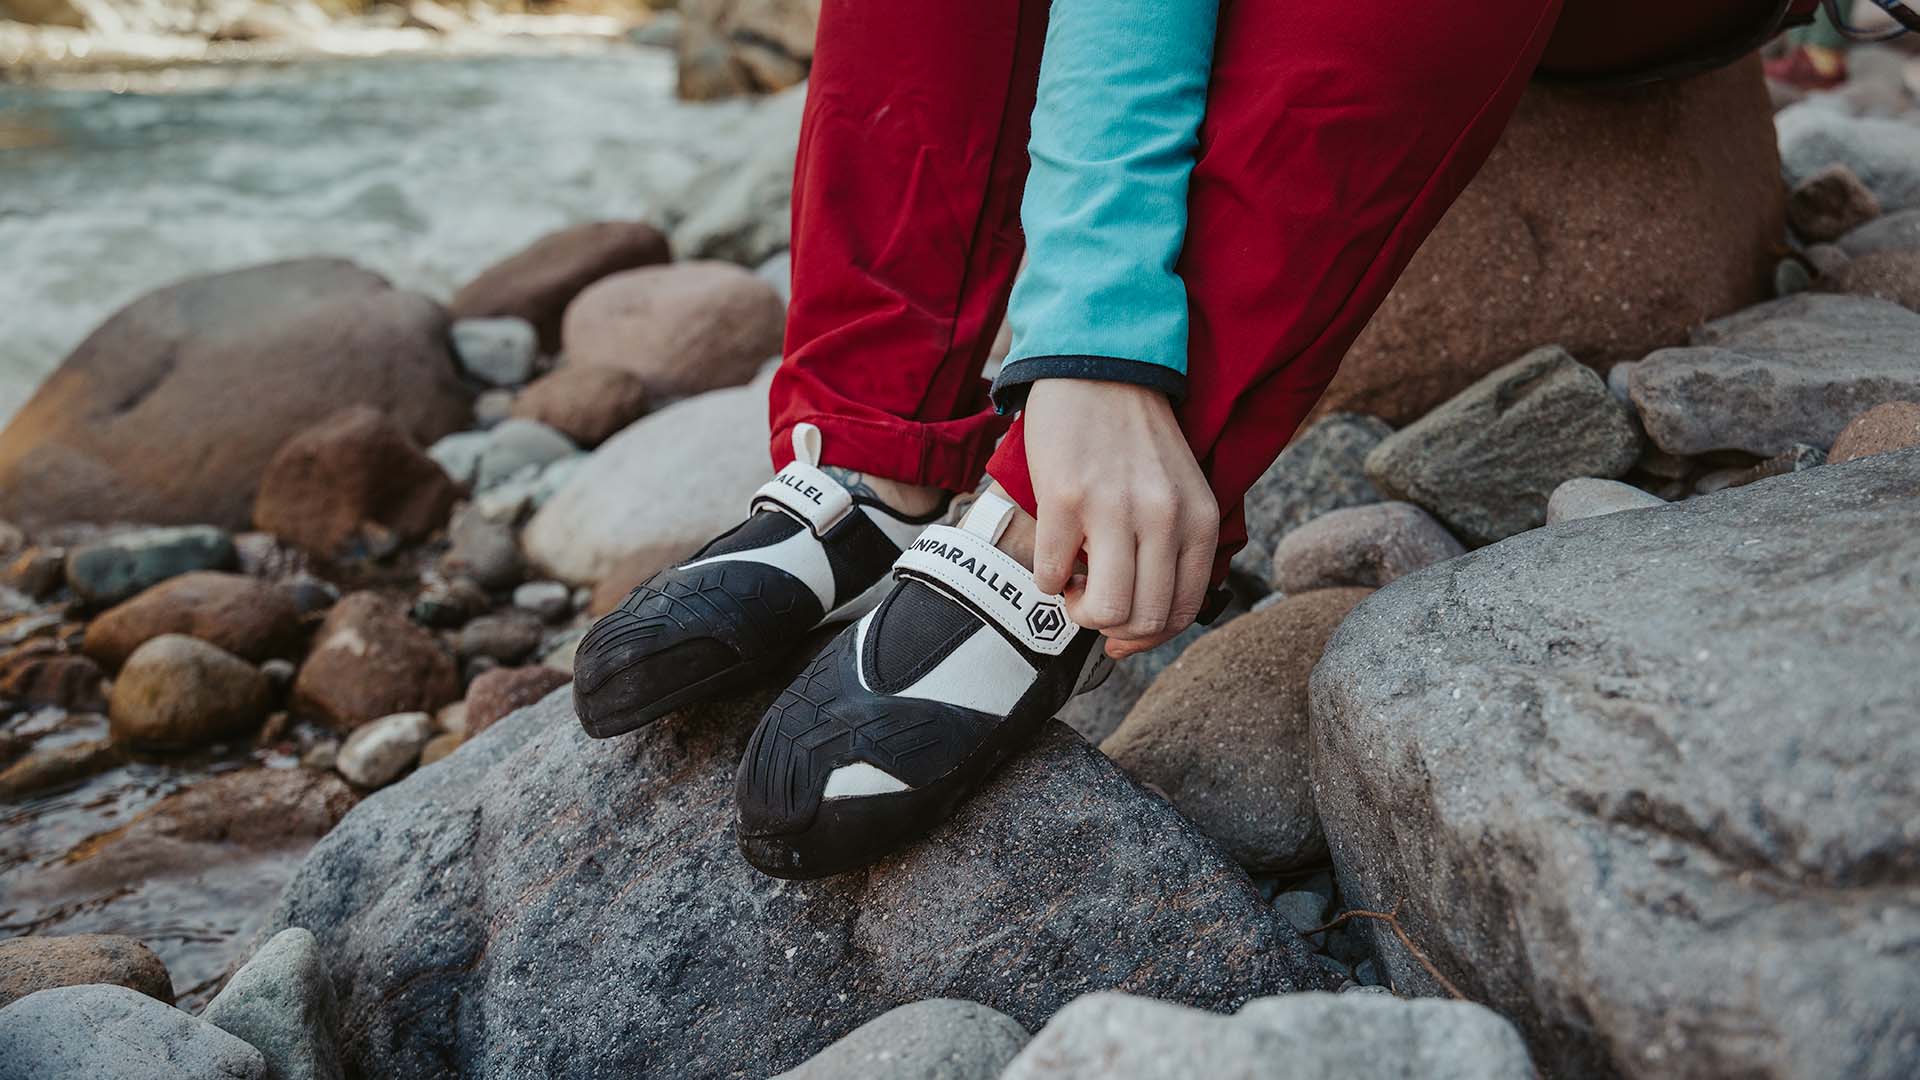 How Tight Should Climbing Shoes Be? The 3 Important Factors